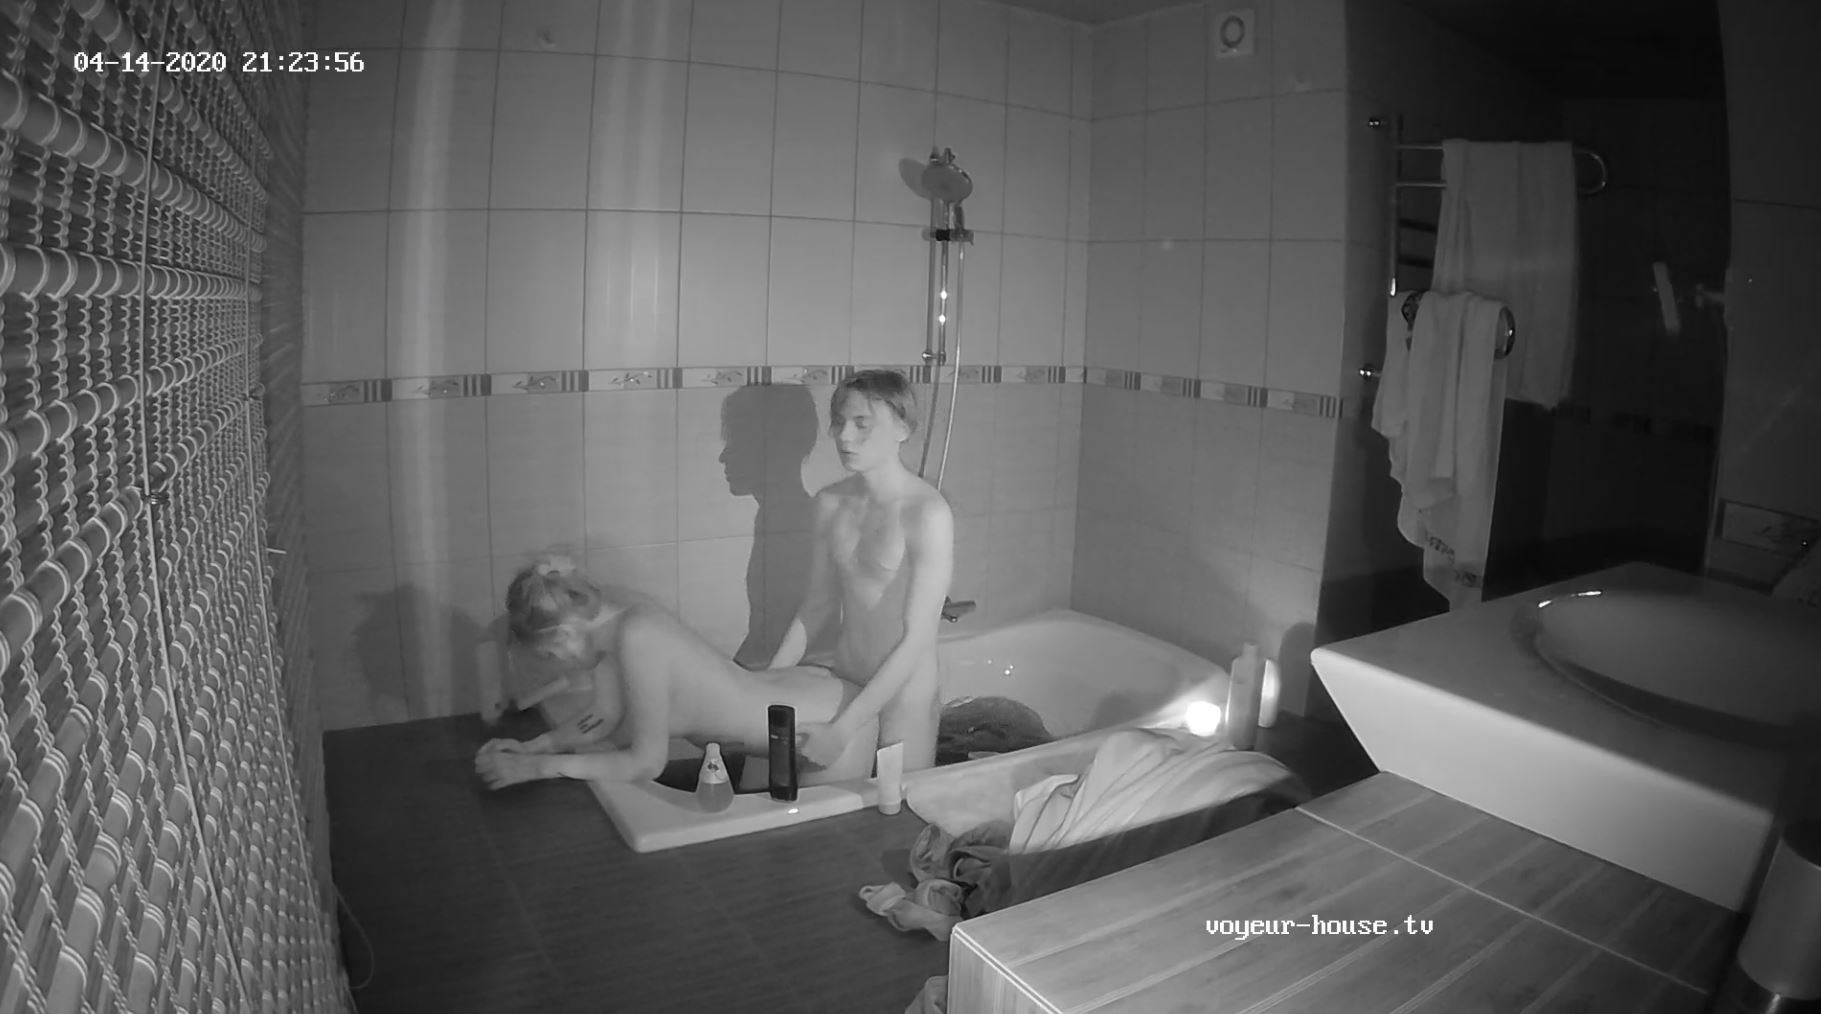 Watch Shower girl Guest couple bath and sex in the dark, Apr14/20 Naked people with Ian and Deborah in Bathroom The biggest Voyeur Videos gallery photo